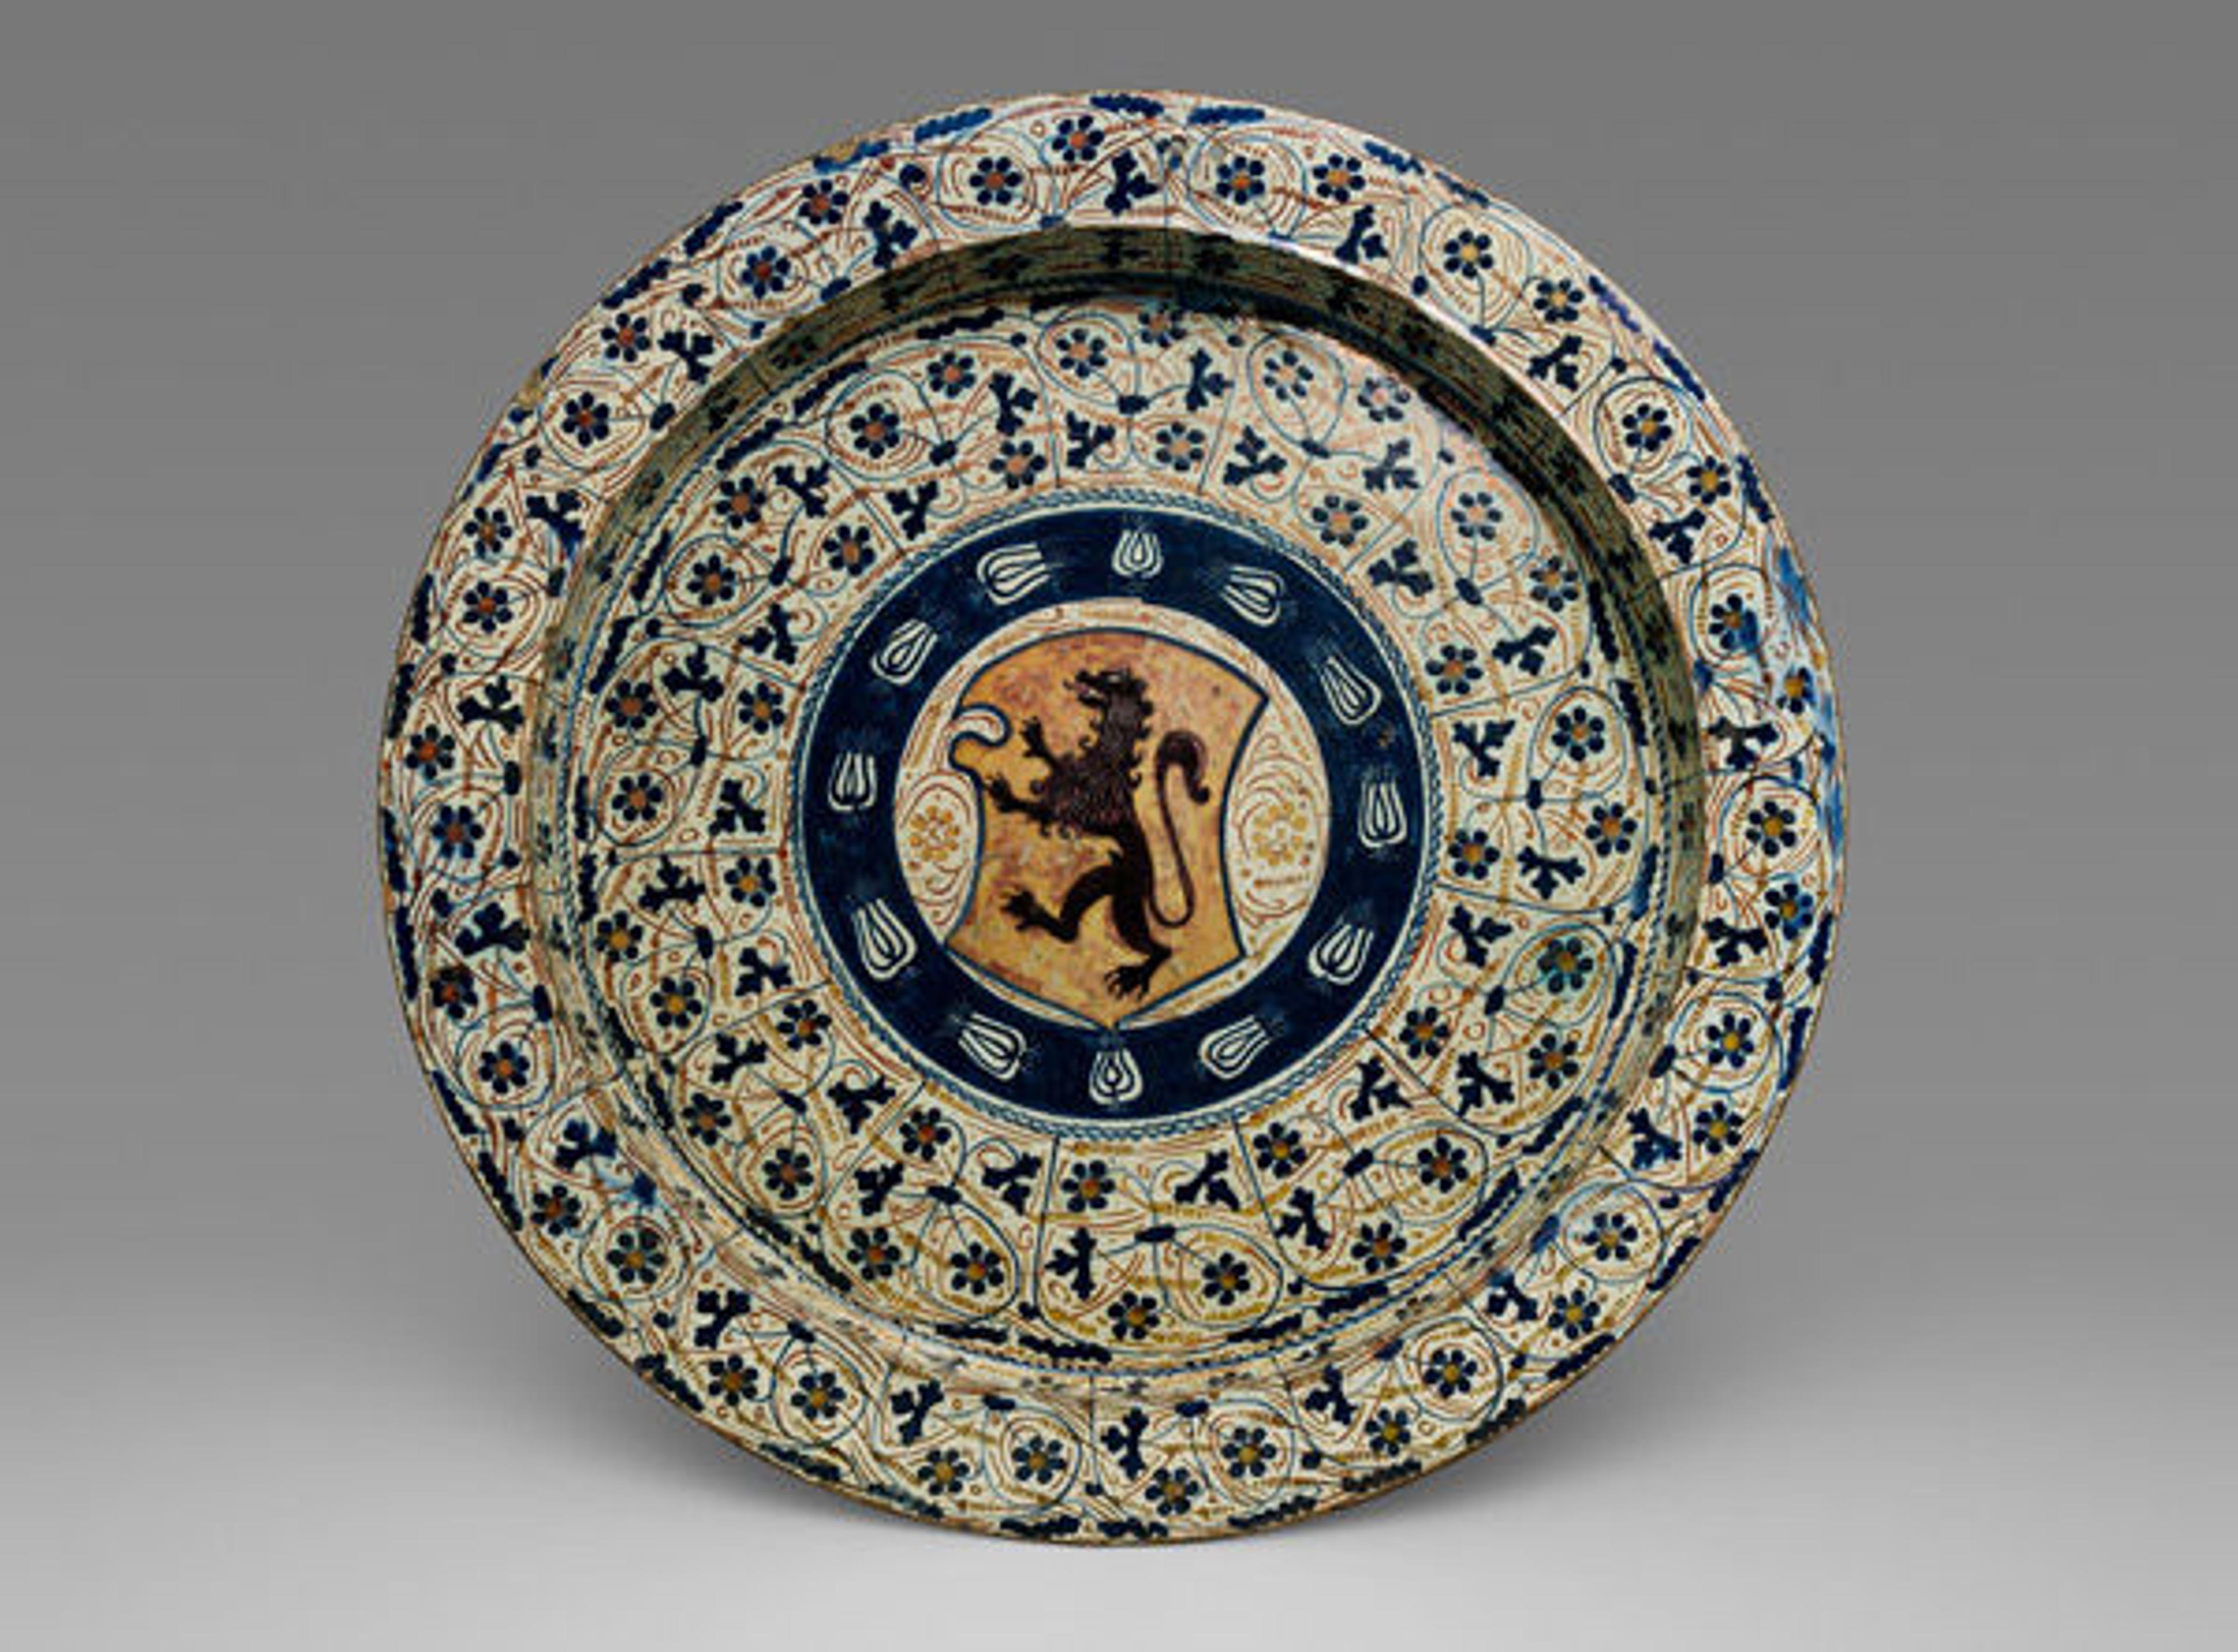 Deep Dish with the coat of arms of the delle Agli Family of Florence. The arms are surrounded by a circle of garlic cloves, or aglio in Italian, which are an allusion to the family name